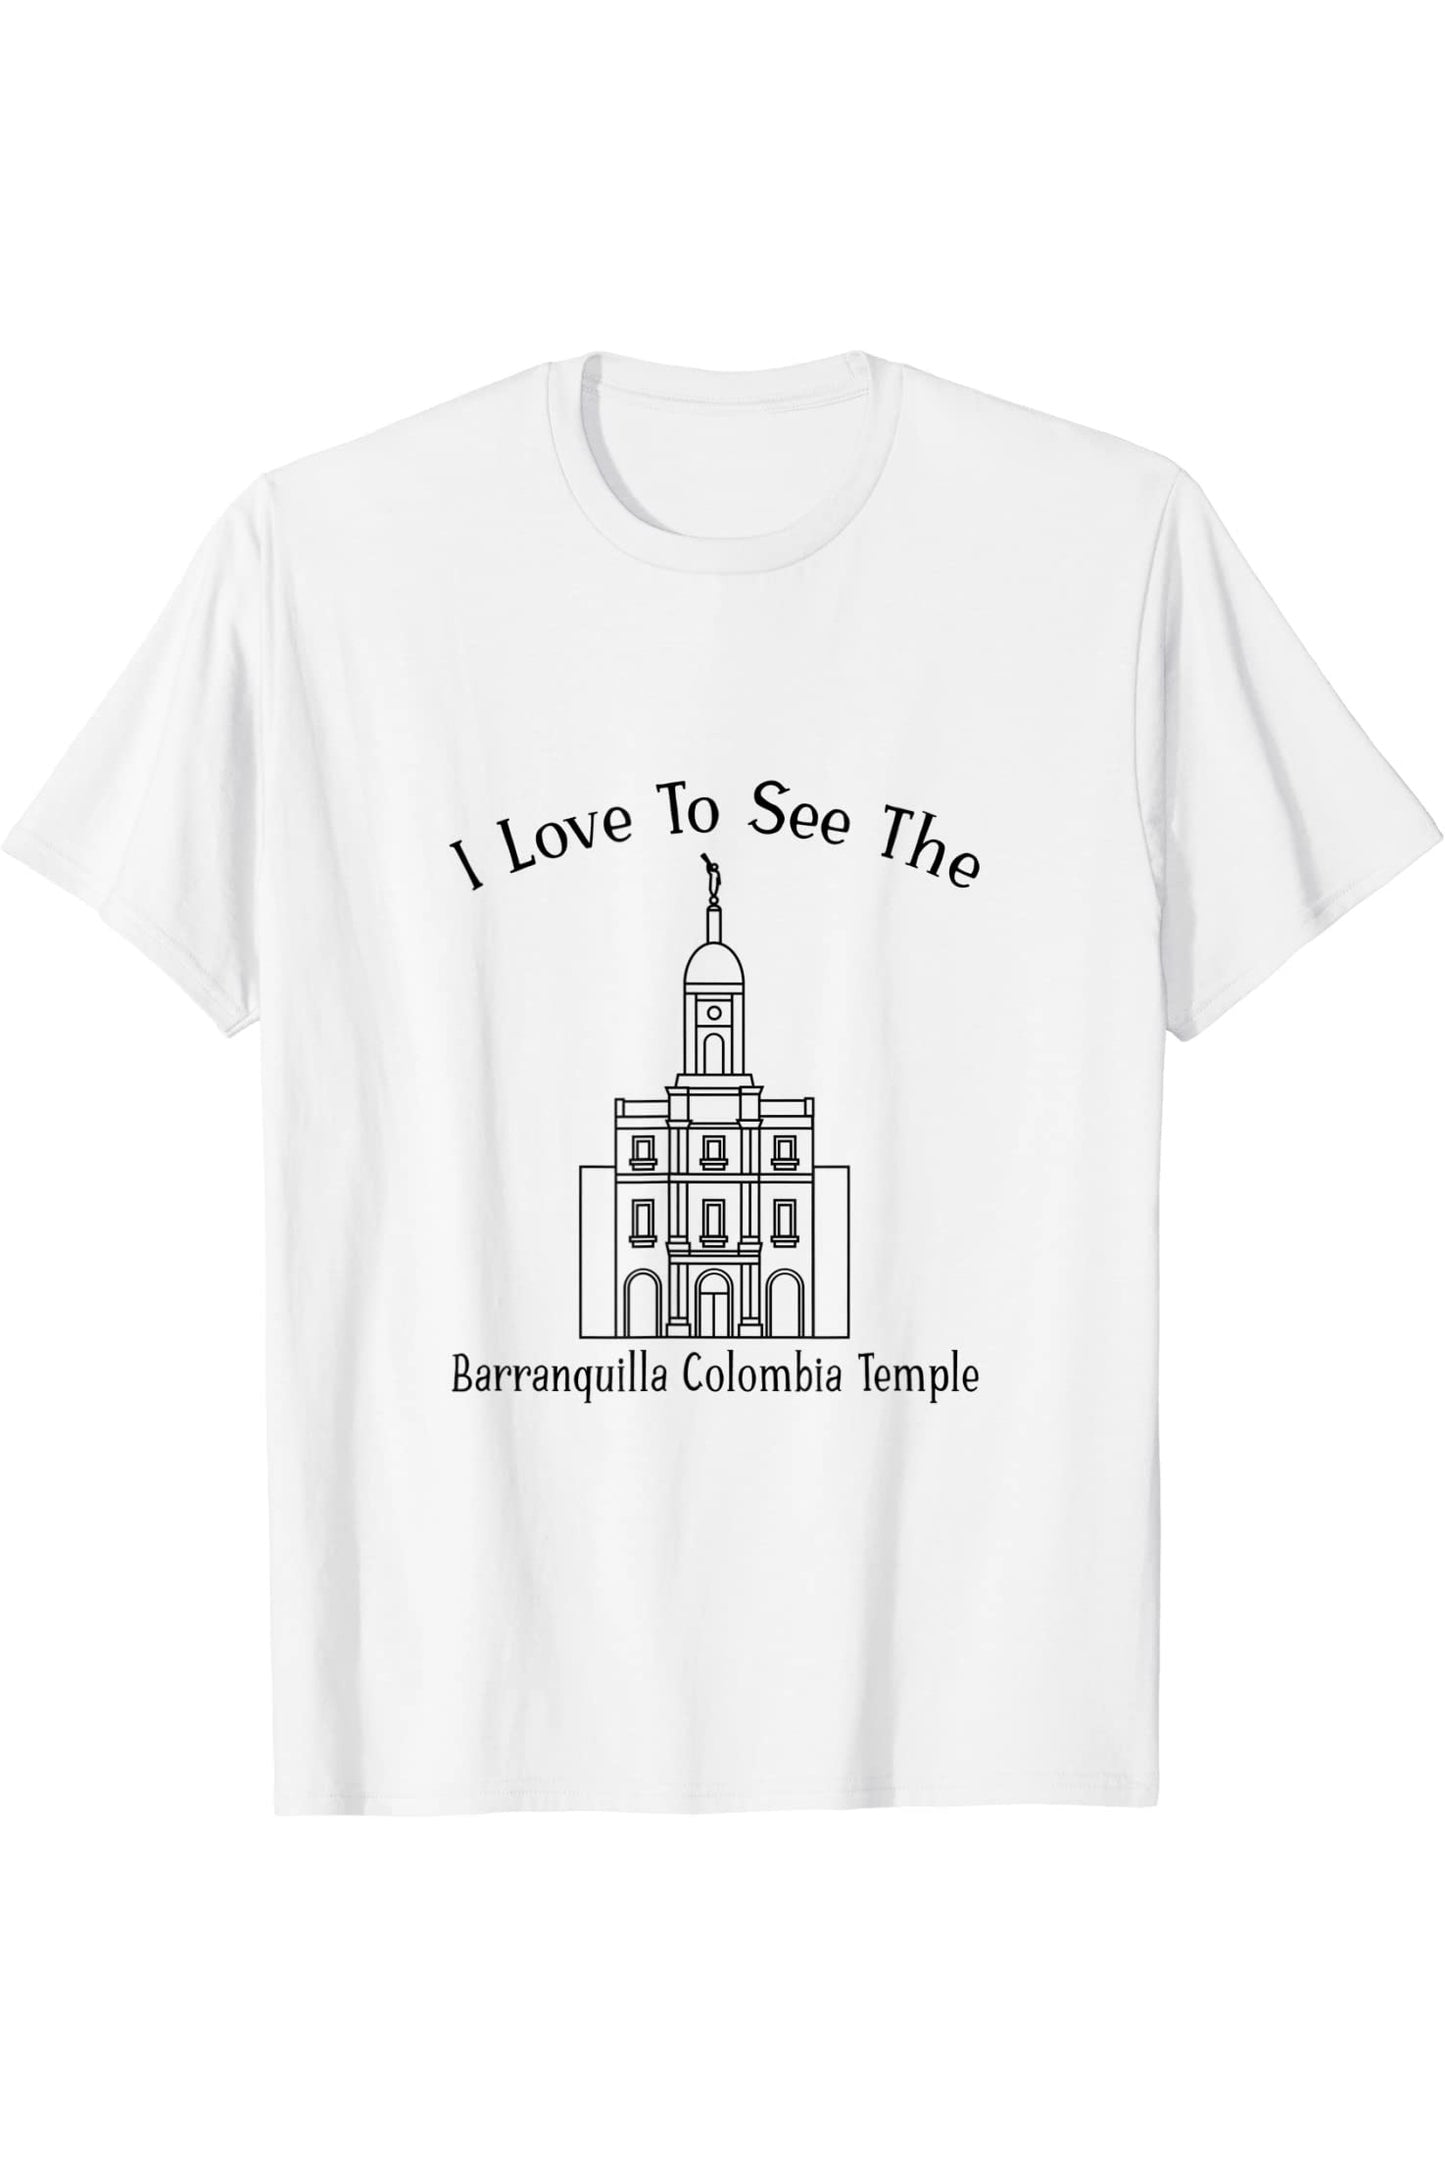 Barranquilla Colombia Temple T-Shirt - Happy Style (English) US